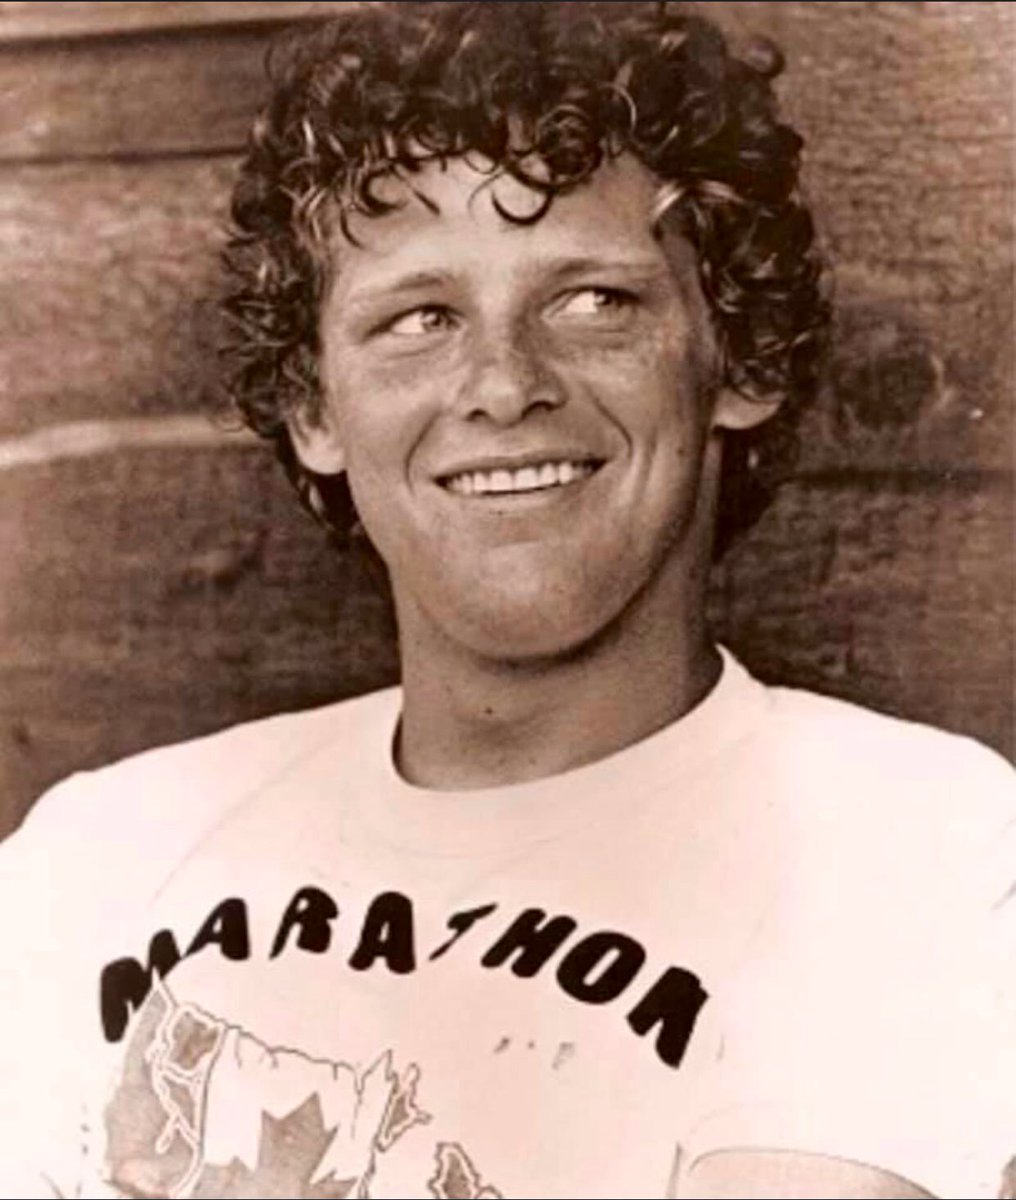 It was 41 years ago today that this young man dipped his leg into the chilly Atlantic Ocean in St. John's. It was the beginning of his Marathon of Hope. If he only knew what kind of legacy he would leave behind. #TerryFox